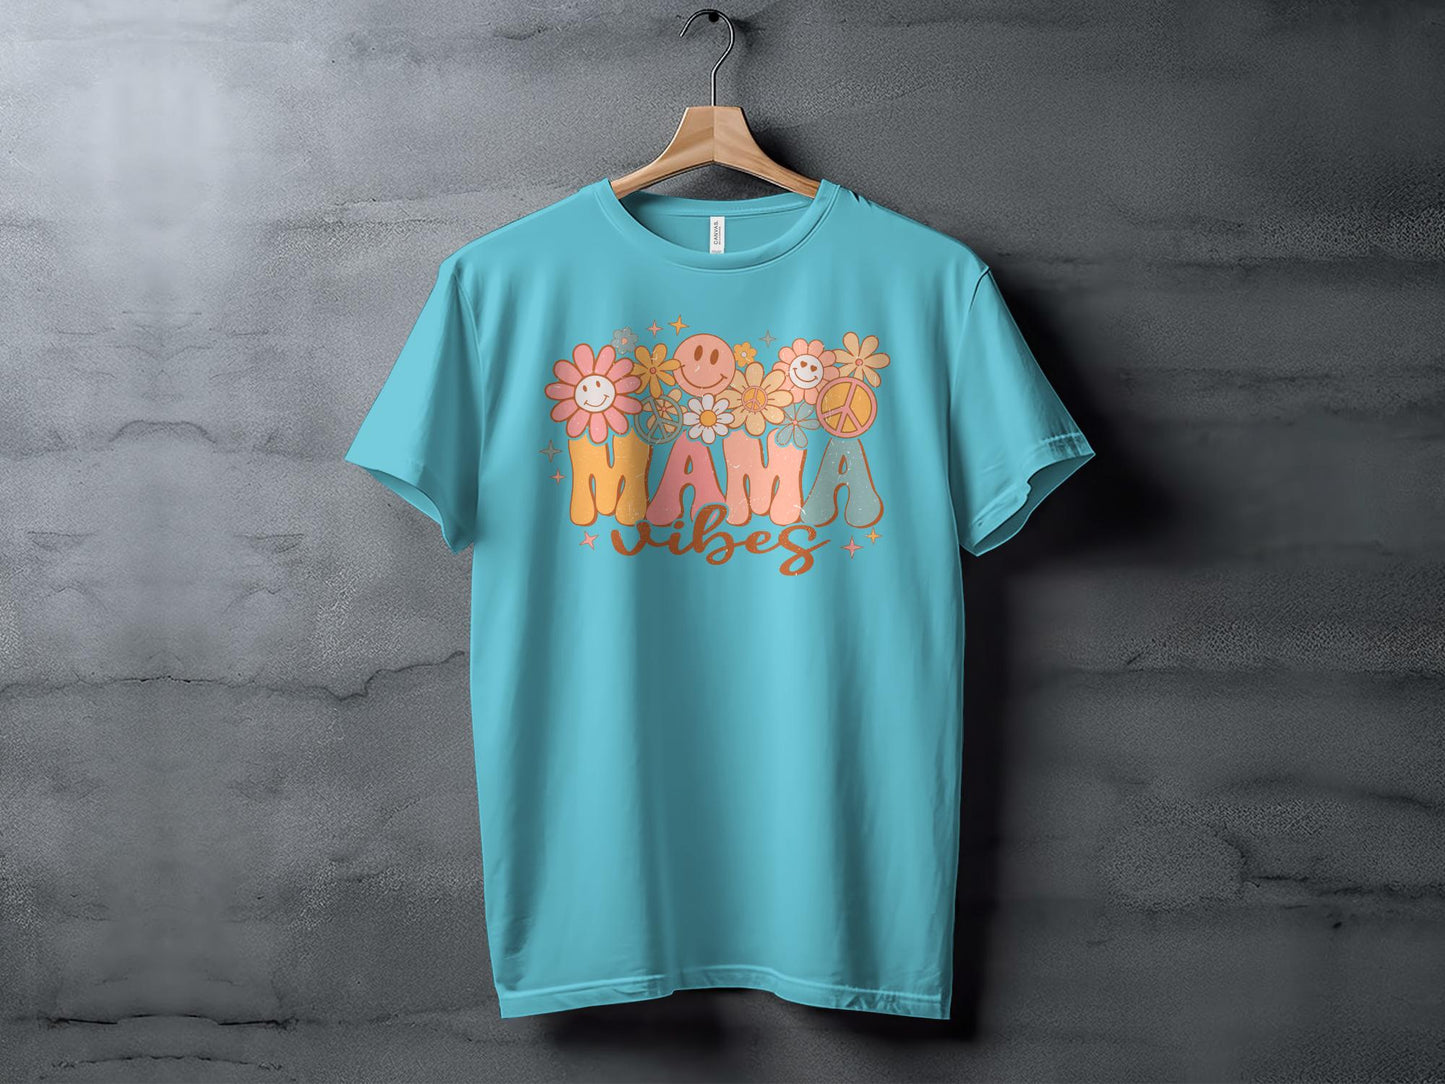 Mama Vibes T-Shirt, Floral Peace Hippie Style Tee, Retro Mom Shirt, Vintage Mother's Day Gift, Casual Women's Clothing